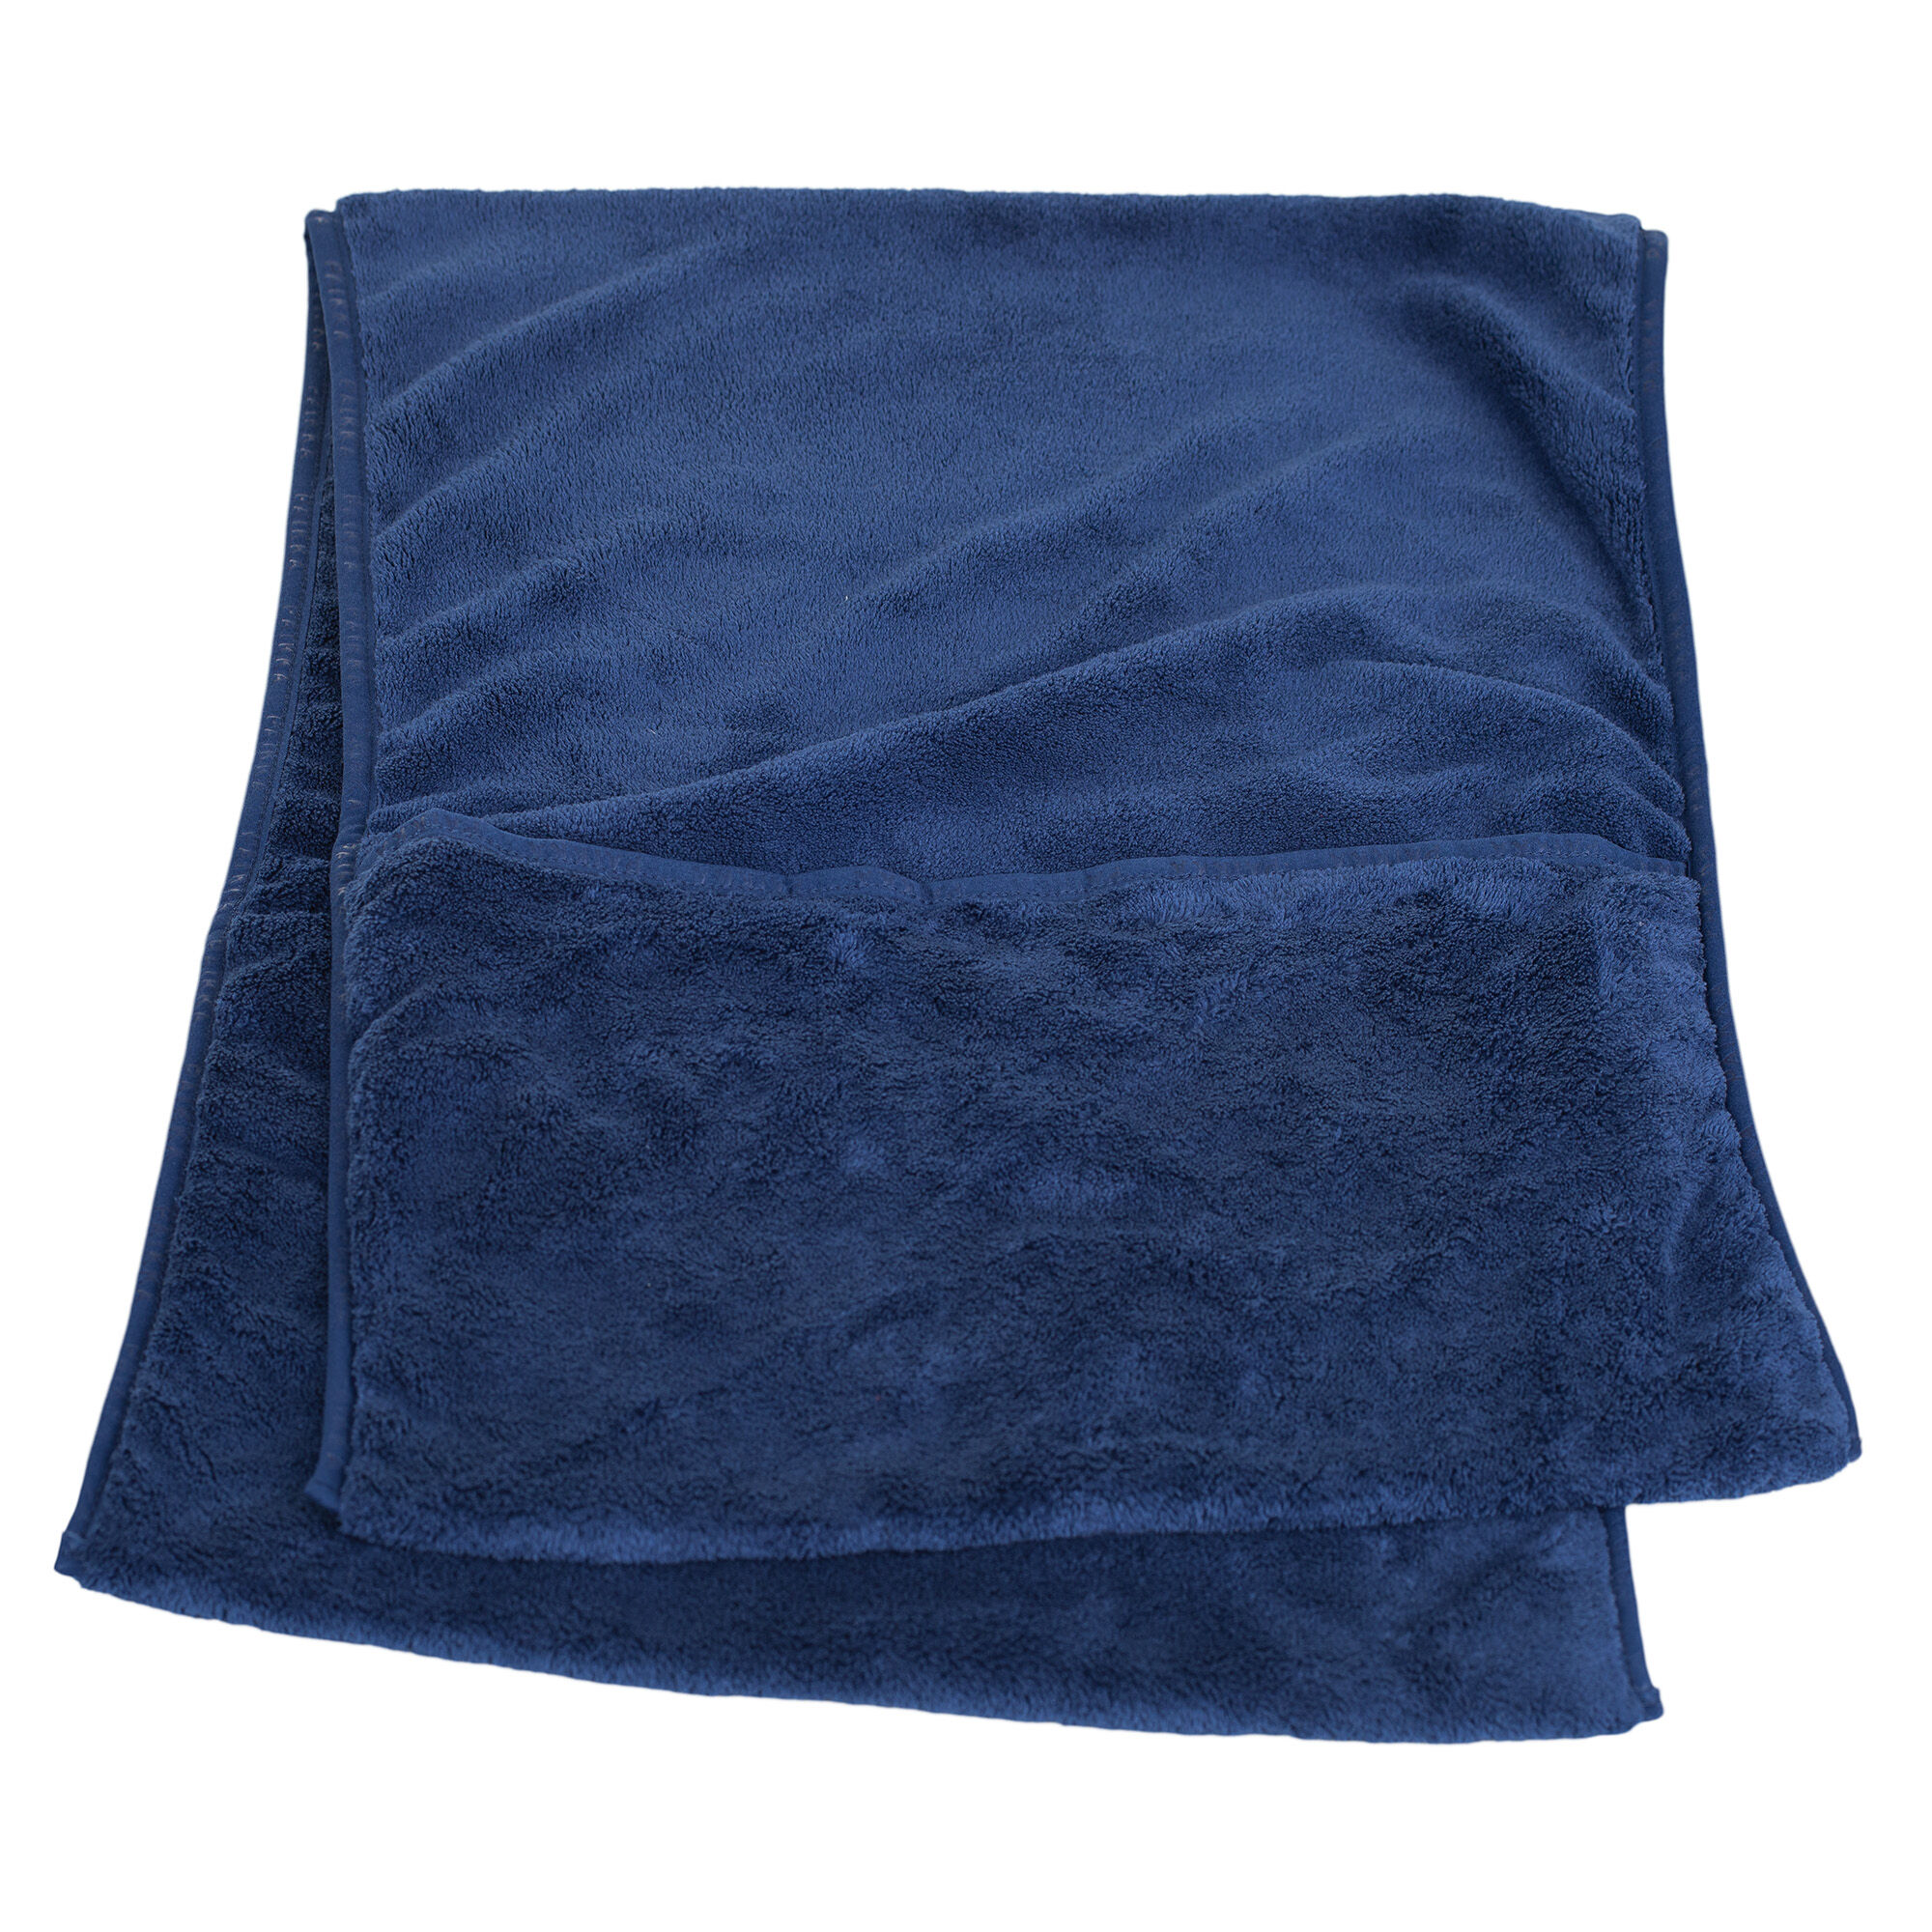 PAIKKDrying-Towel-Comfort-Navy-Taupe-Hundhandtuch-60-46643